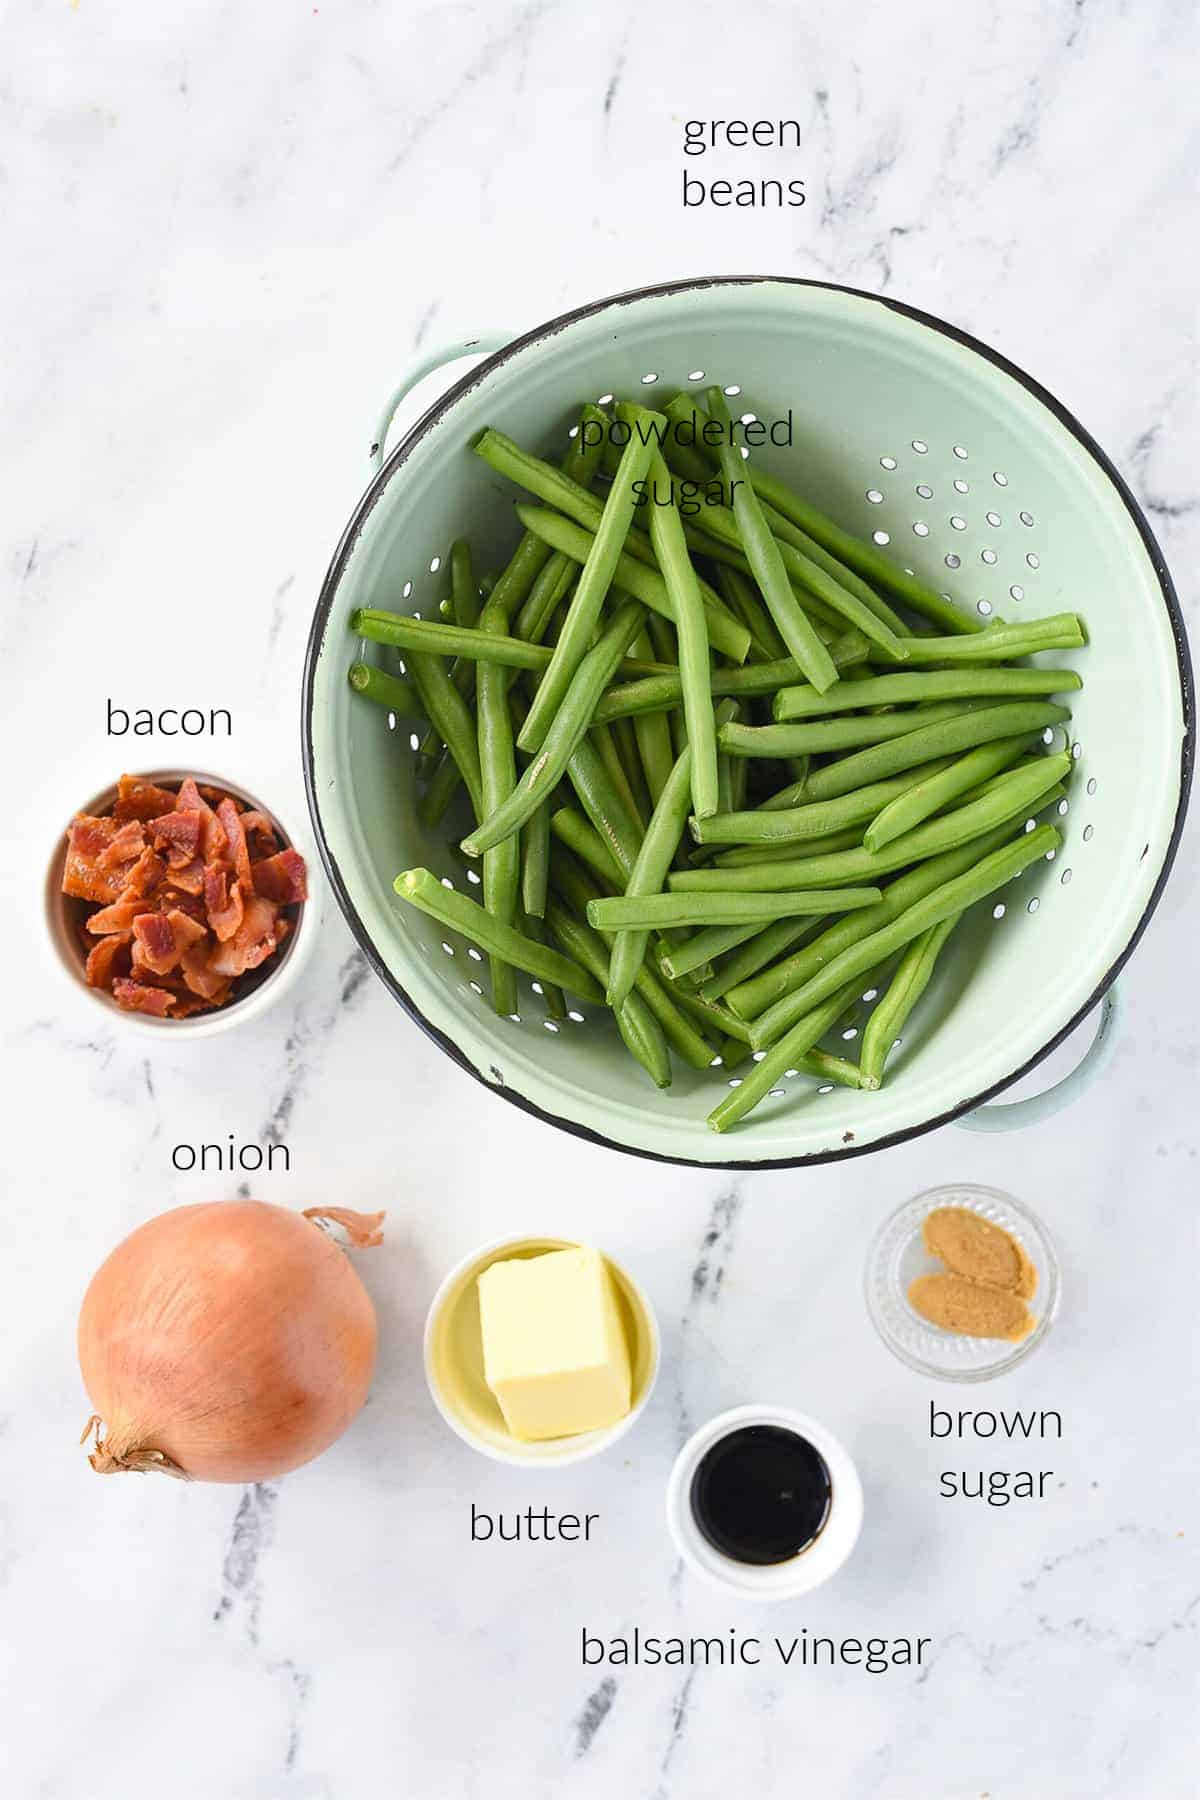 green beans with bacon ingredientws
